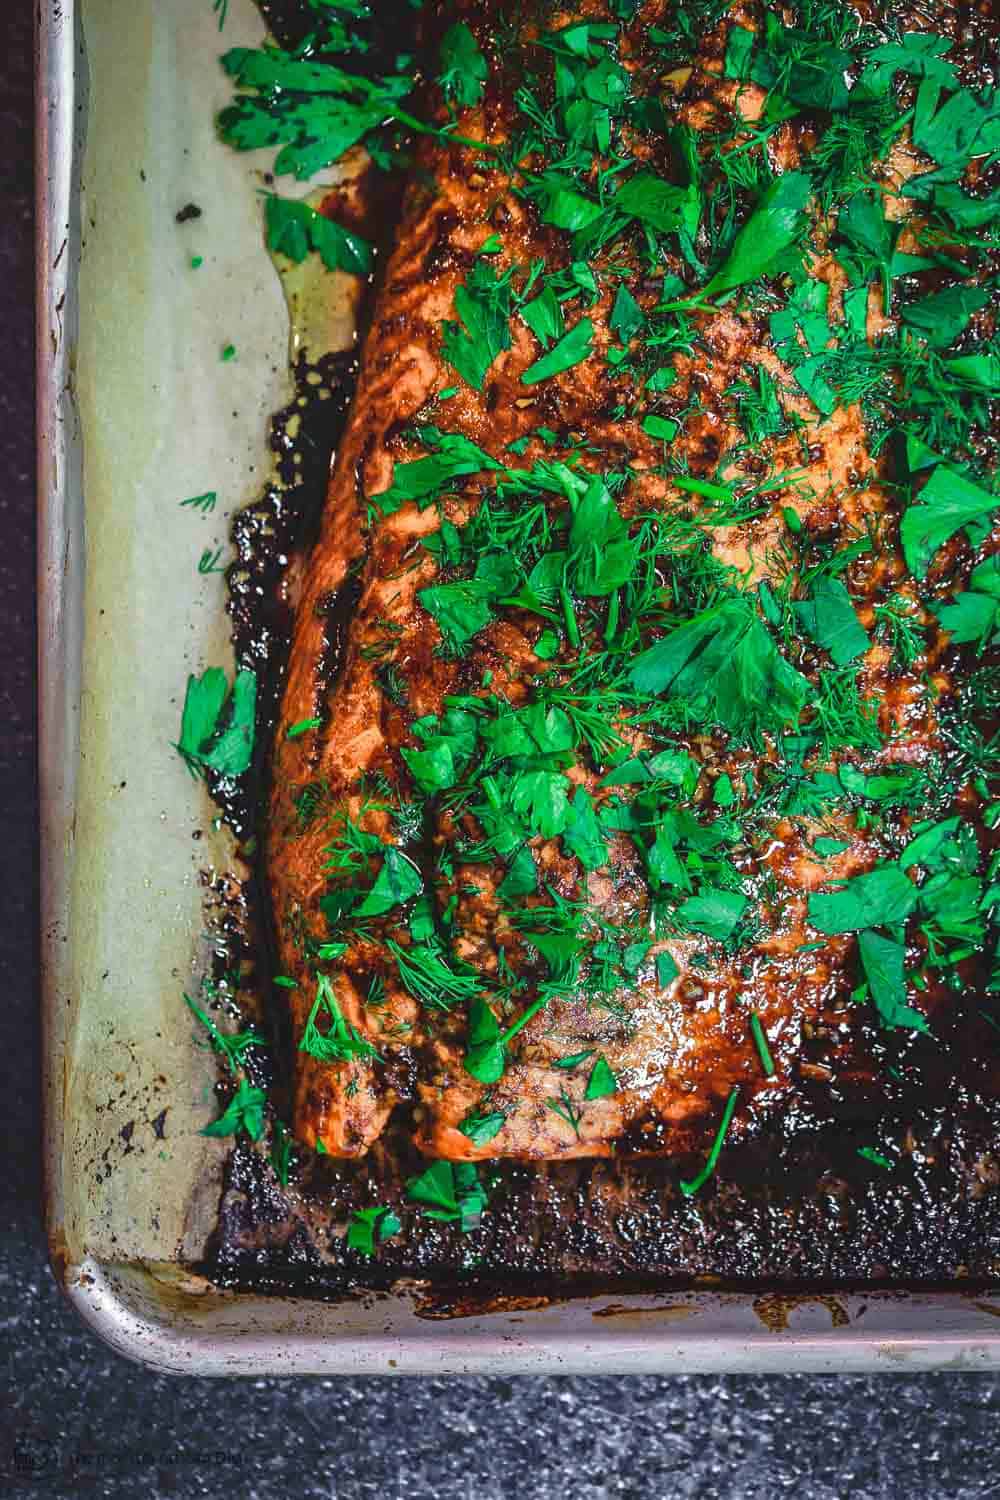 Baked Salmon garnished with fresh dill and parsley